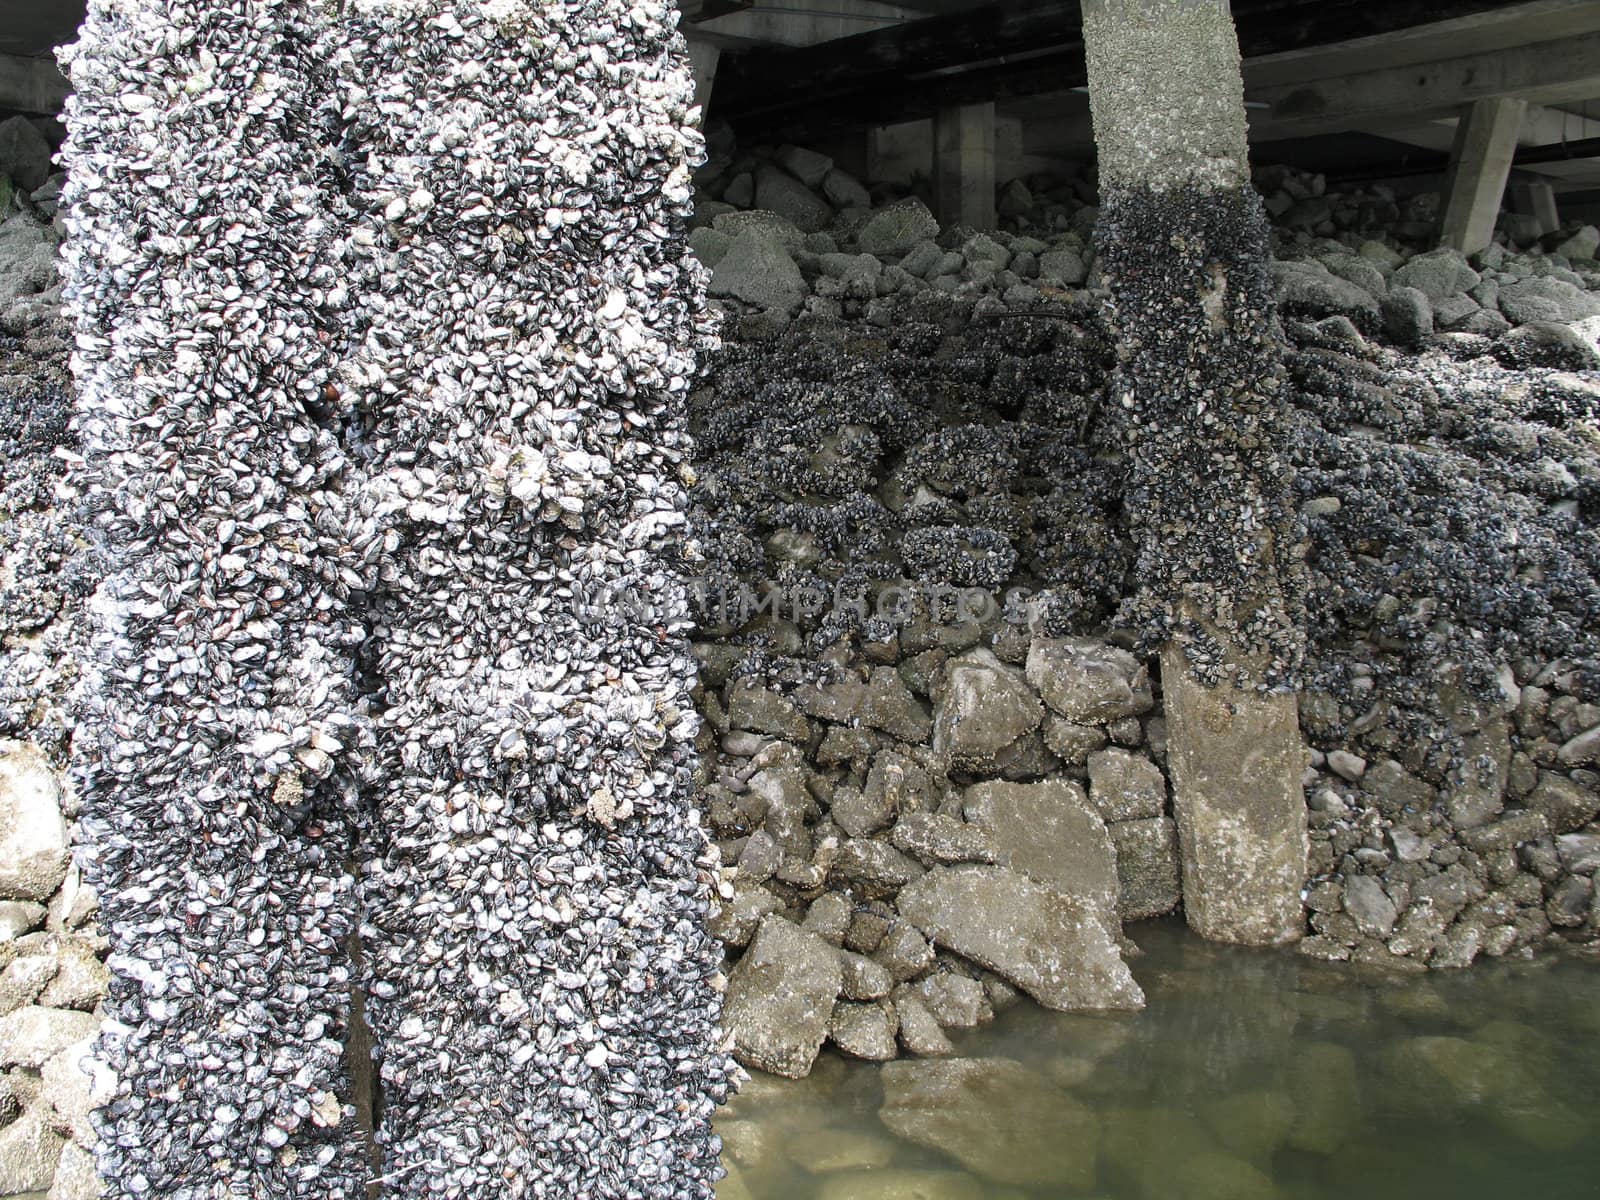 bridge structure covered with shells